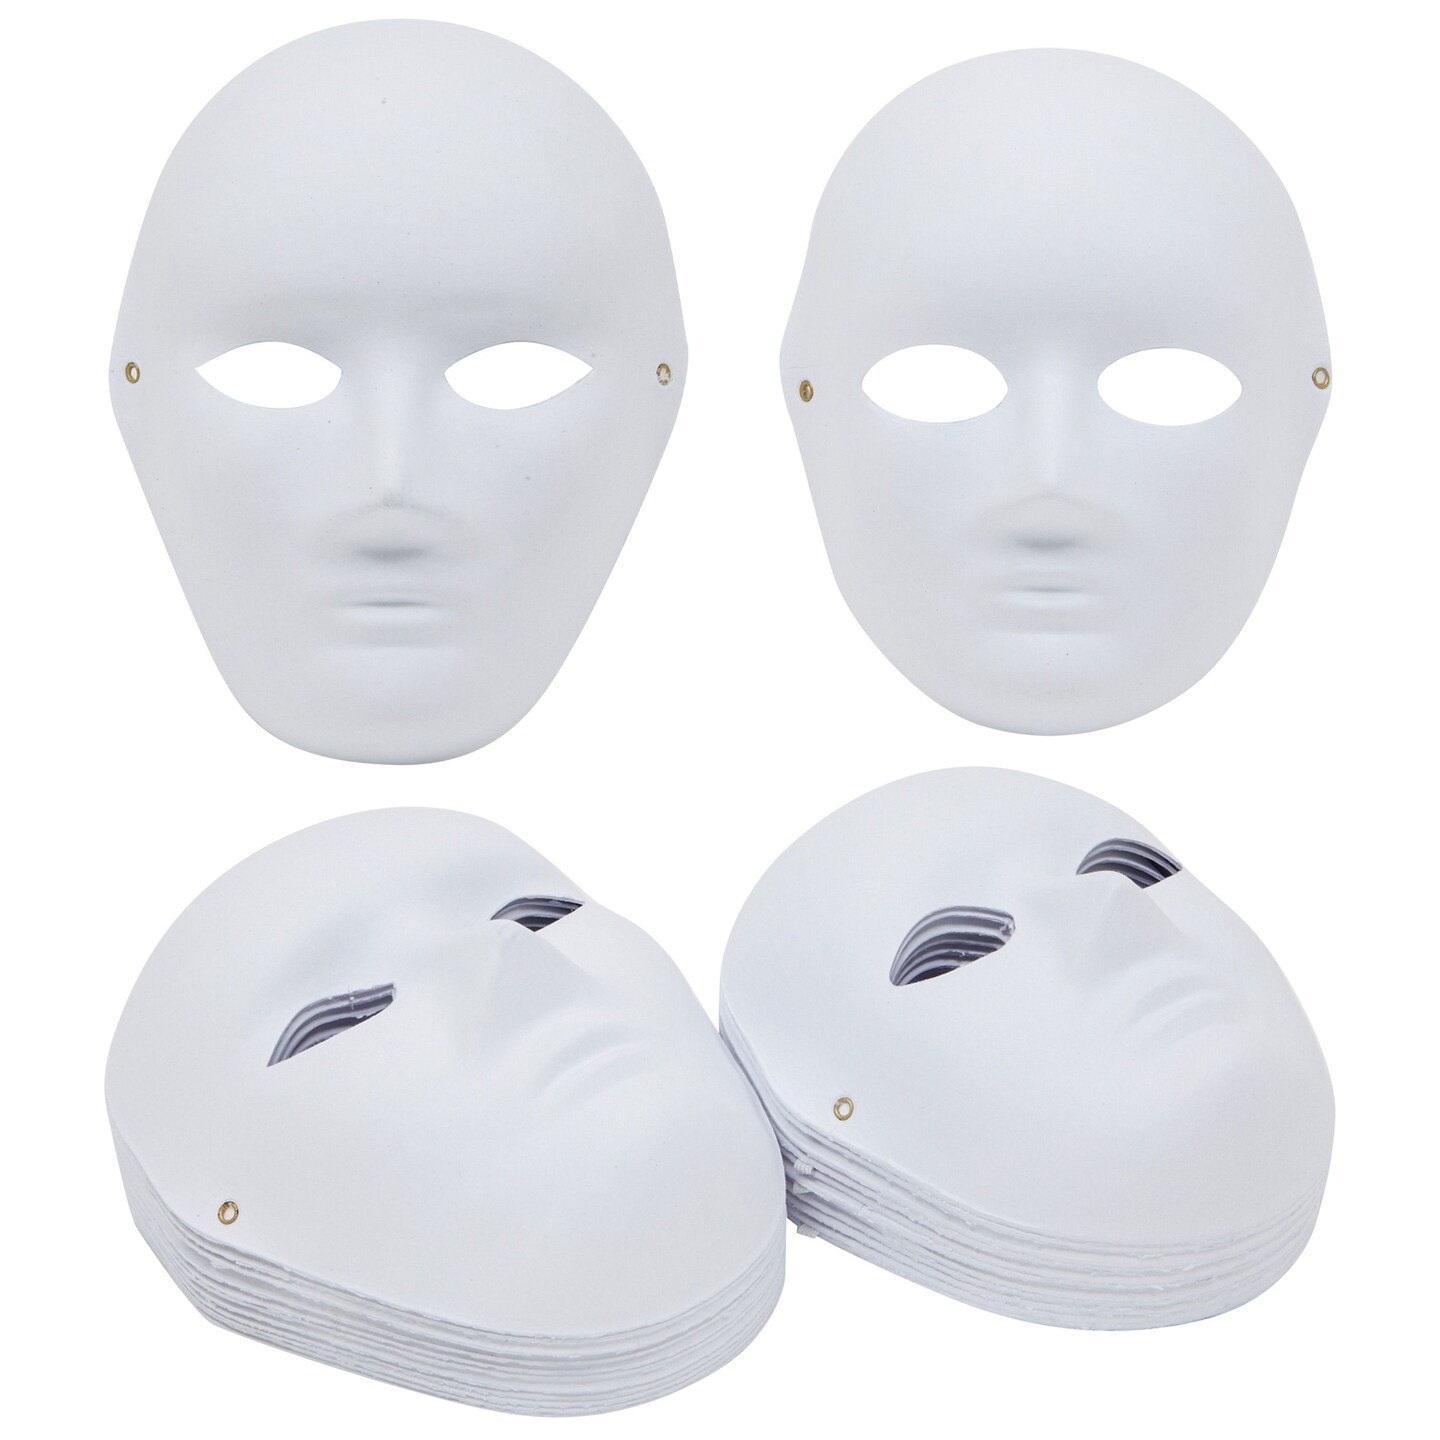 Blank Face White Mask - Use It For Dress Up - Halloween - Cosplay - Your  Choice!